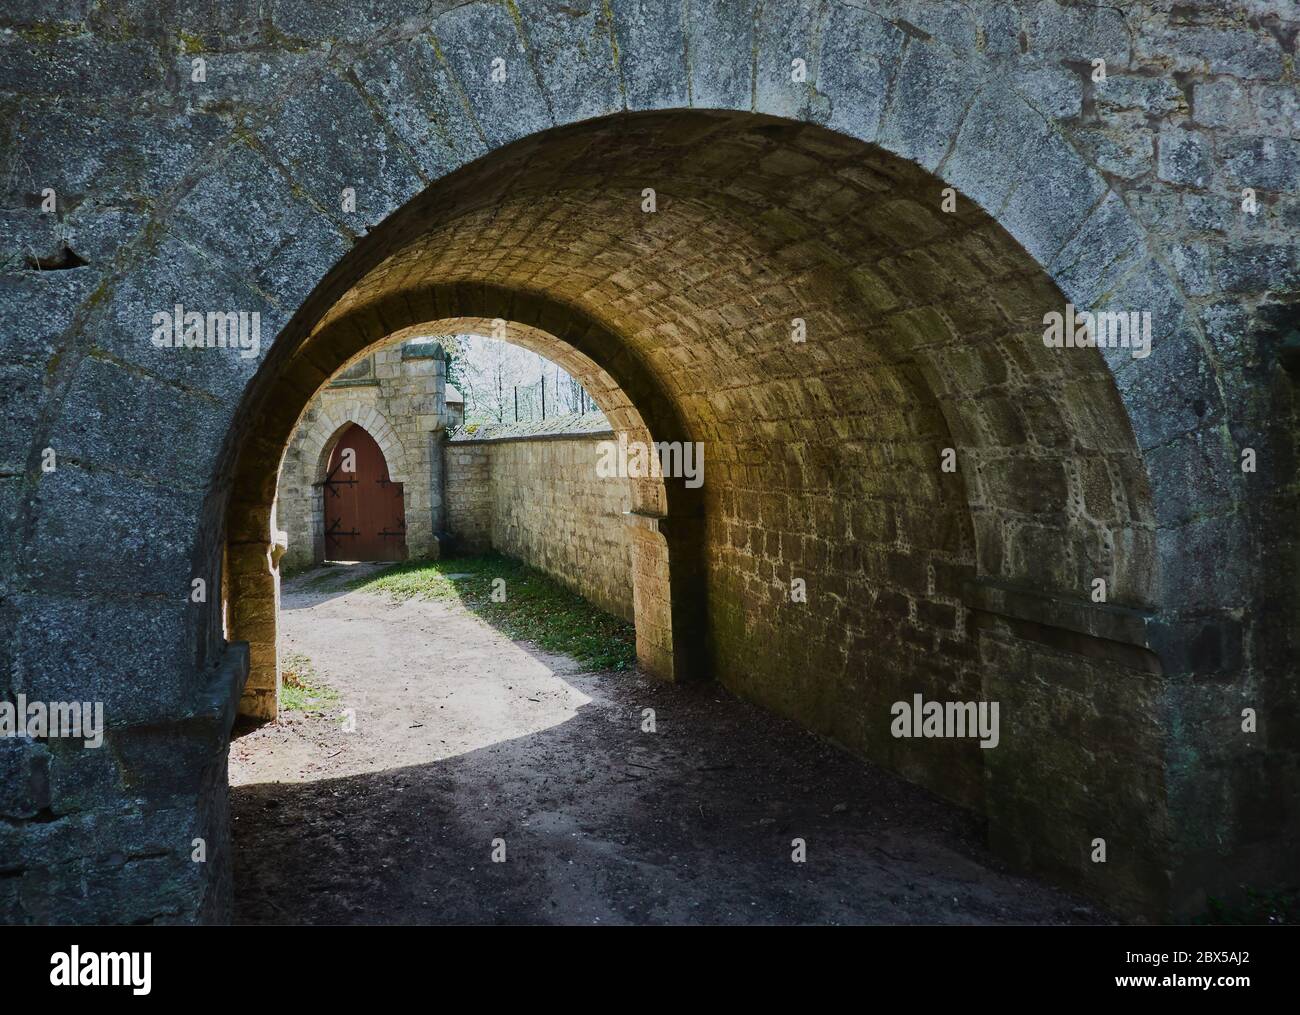 Dark arcade of roughly hewn stones with bright sunlight at the exit Stock Photo